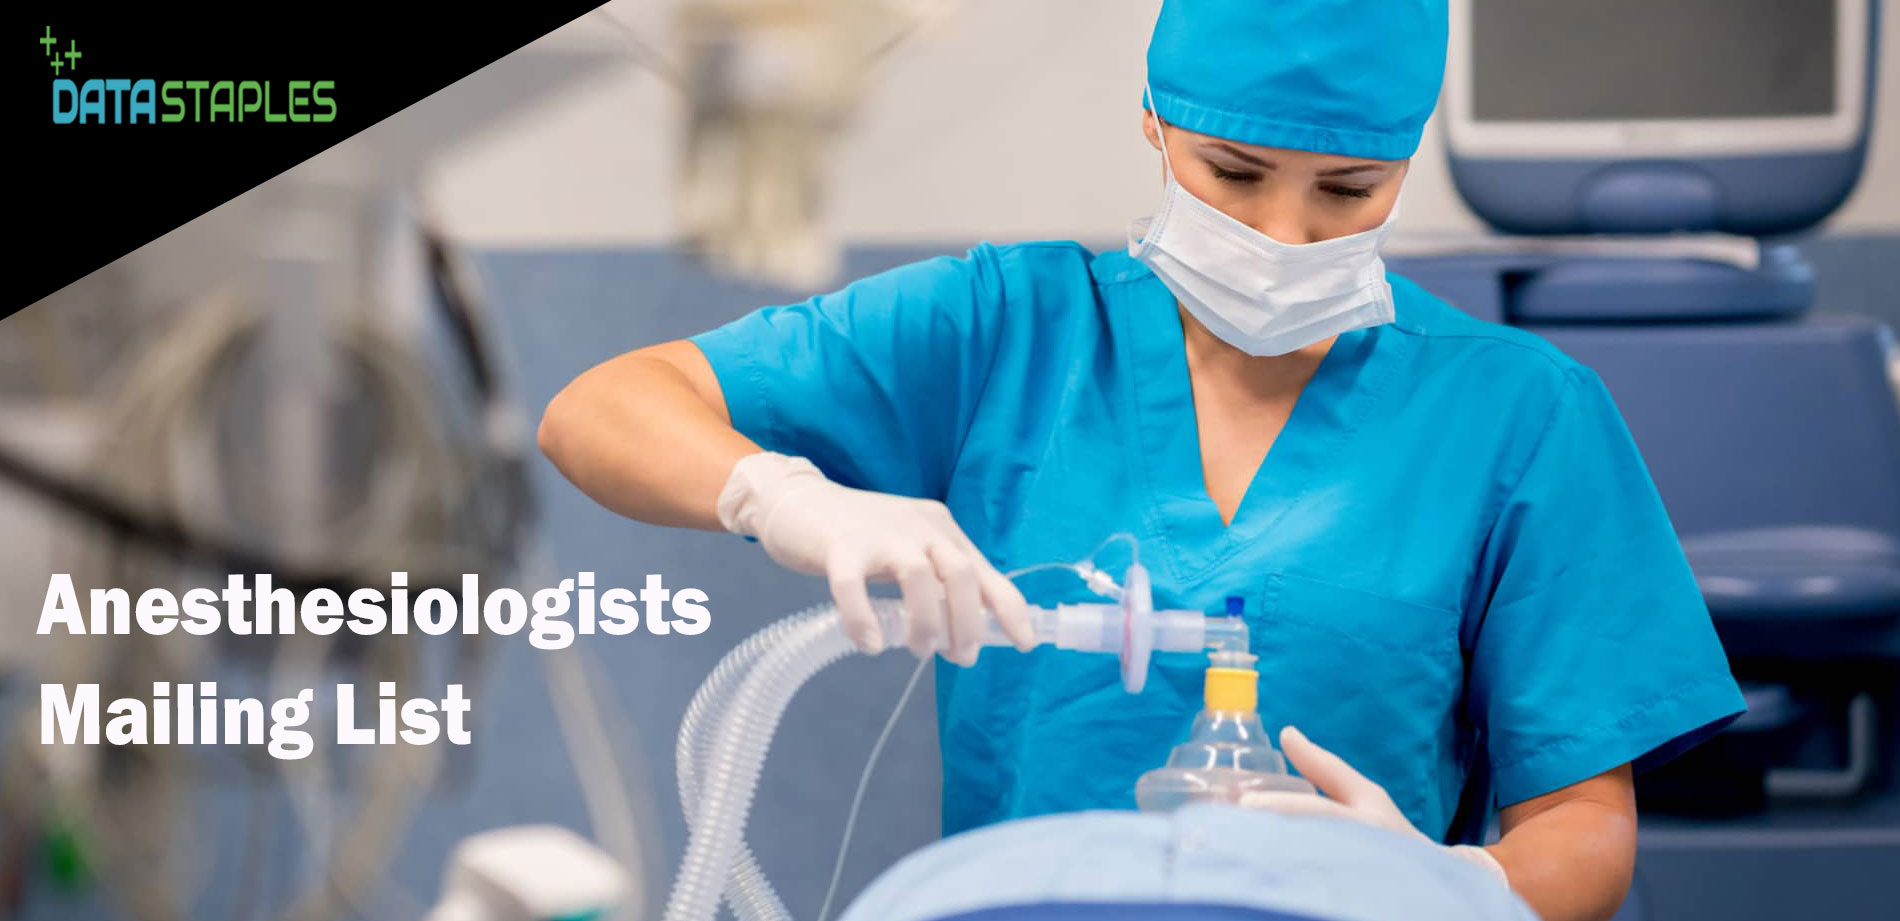 Anesthesiologists Mailing List | DataStaples